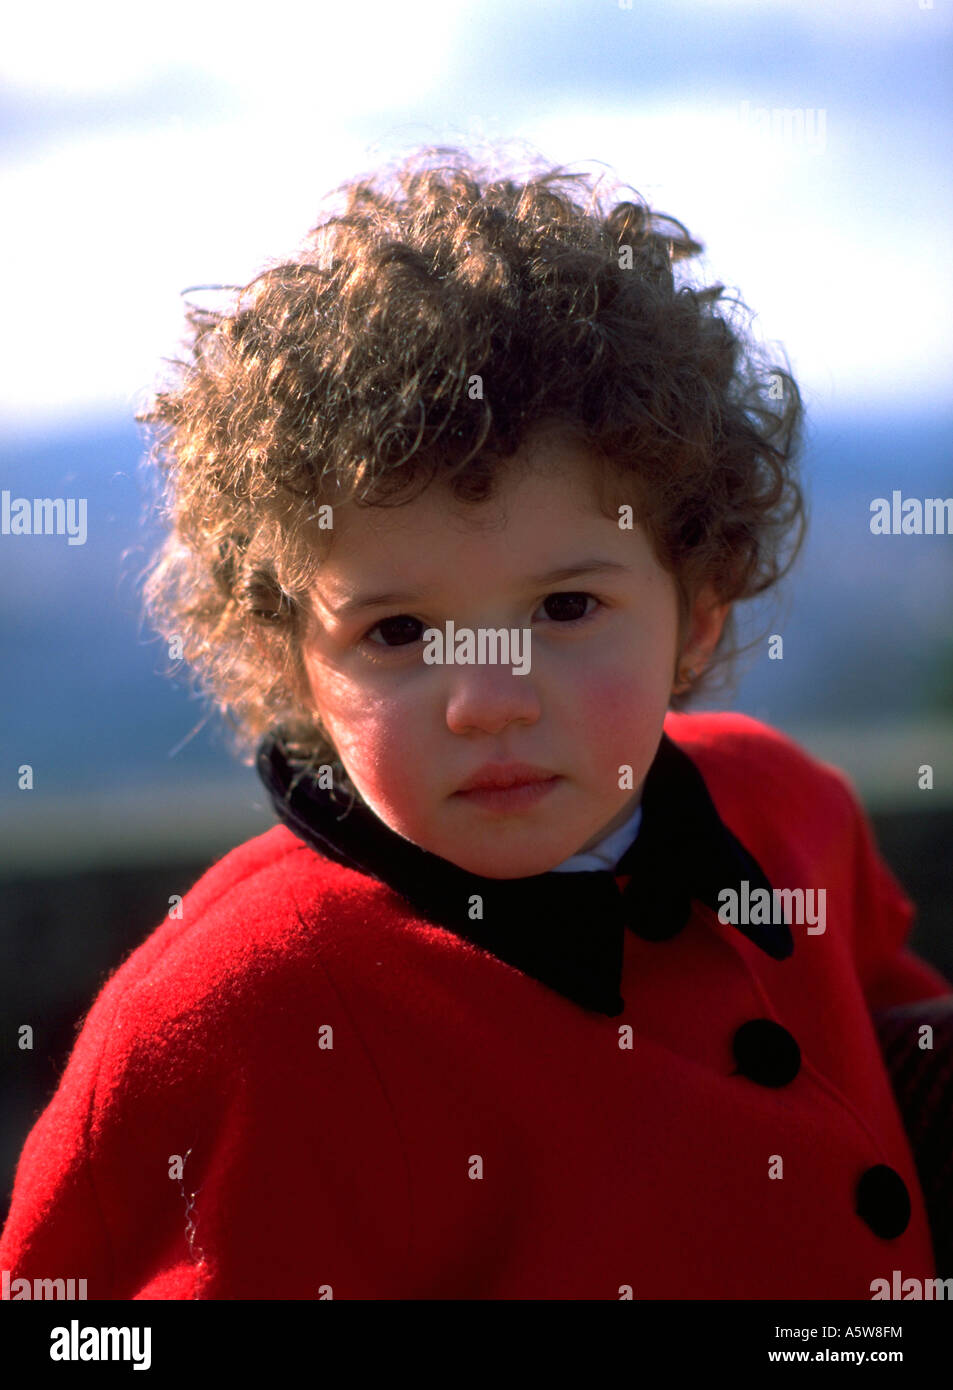 Painet hl0573 portuguese girl portugal braga children kids child kid iberia  europe serious youth childhood people home Stock Photo - Alamy